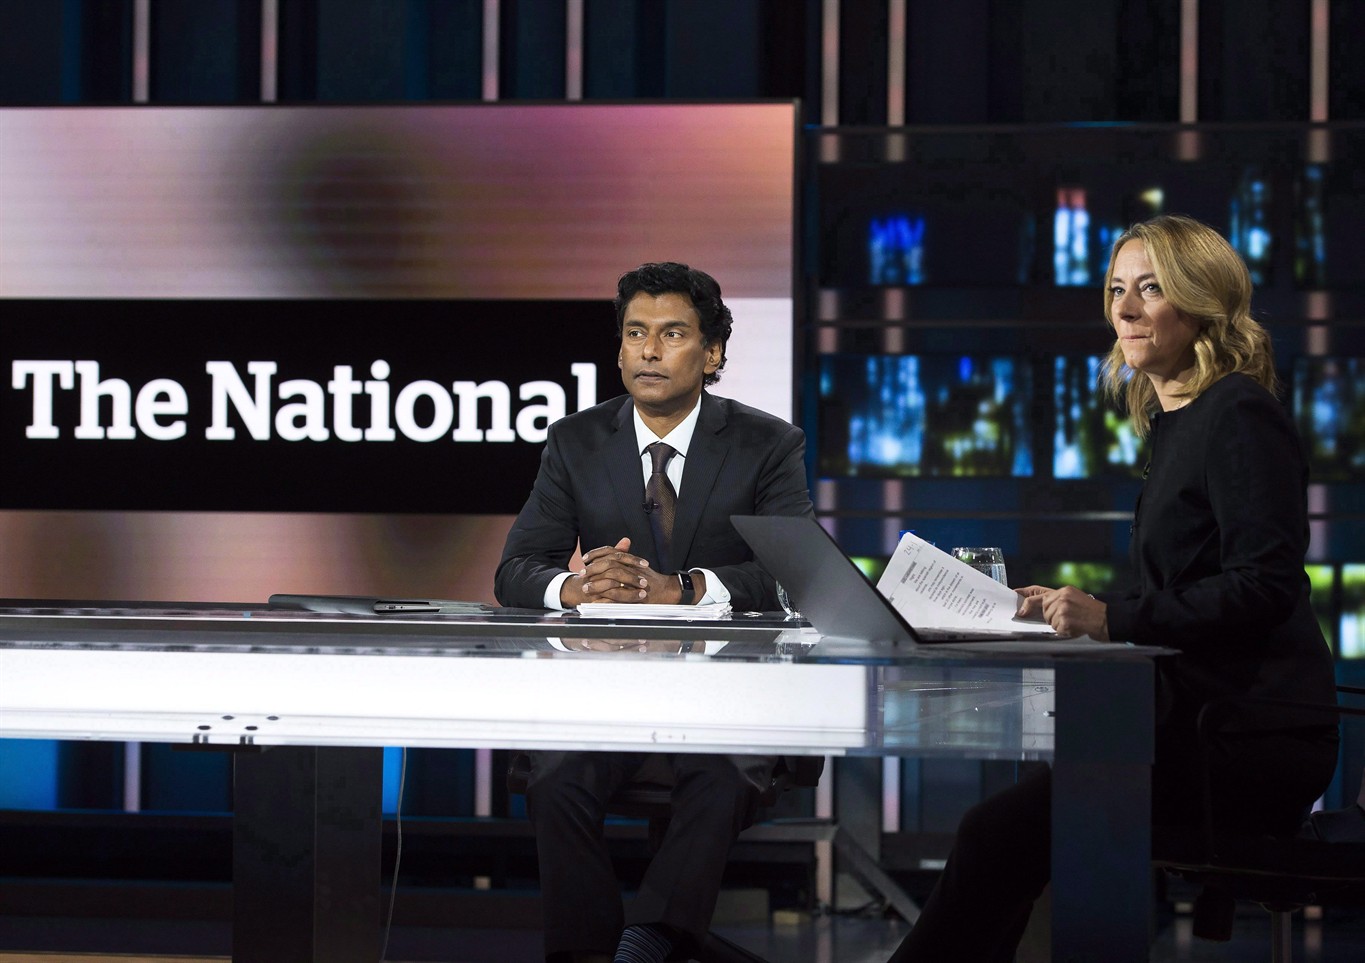 CBC with ratings for revamped 'The National' despite post